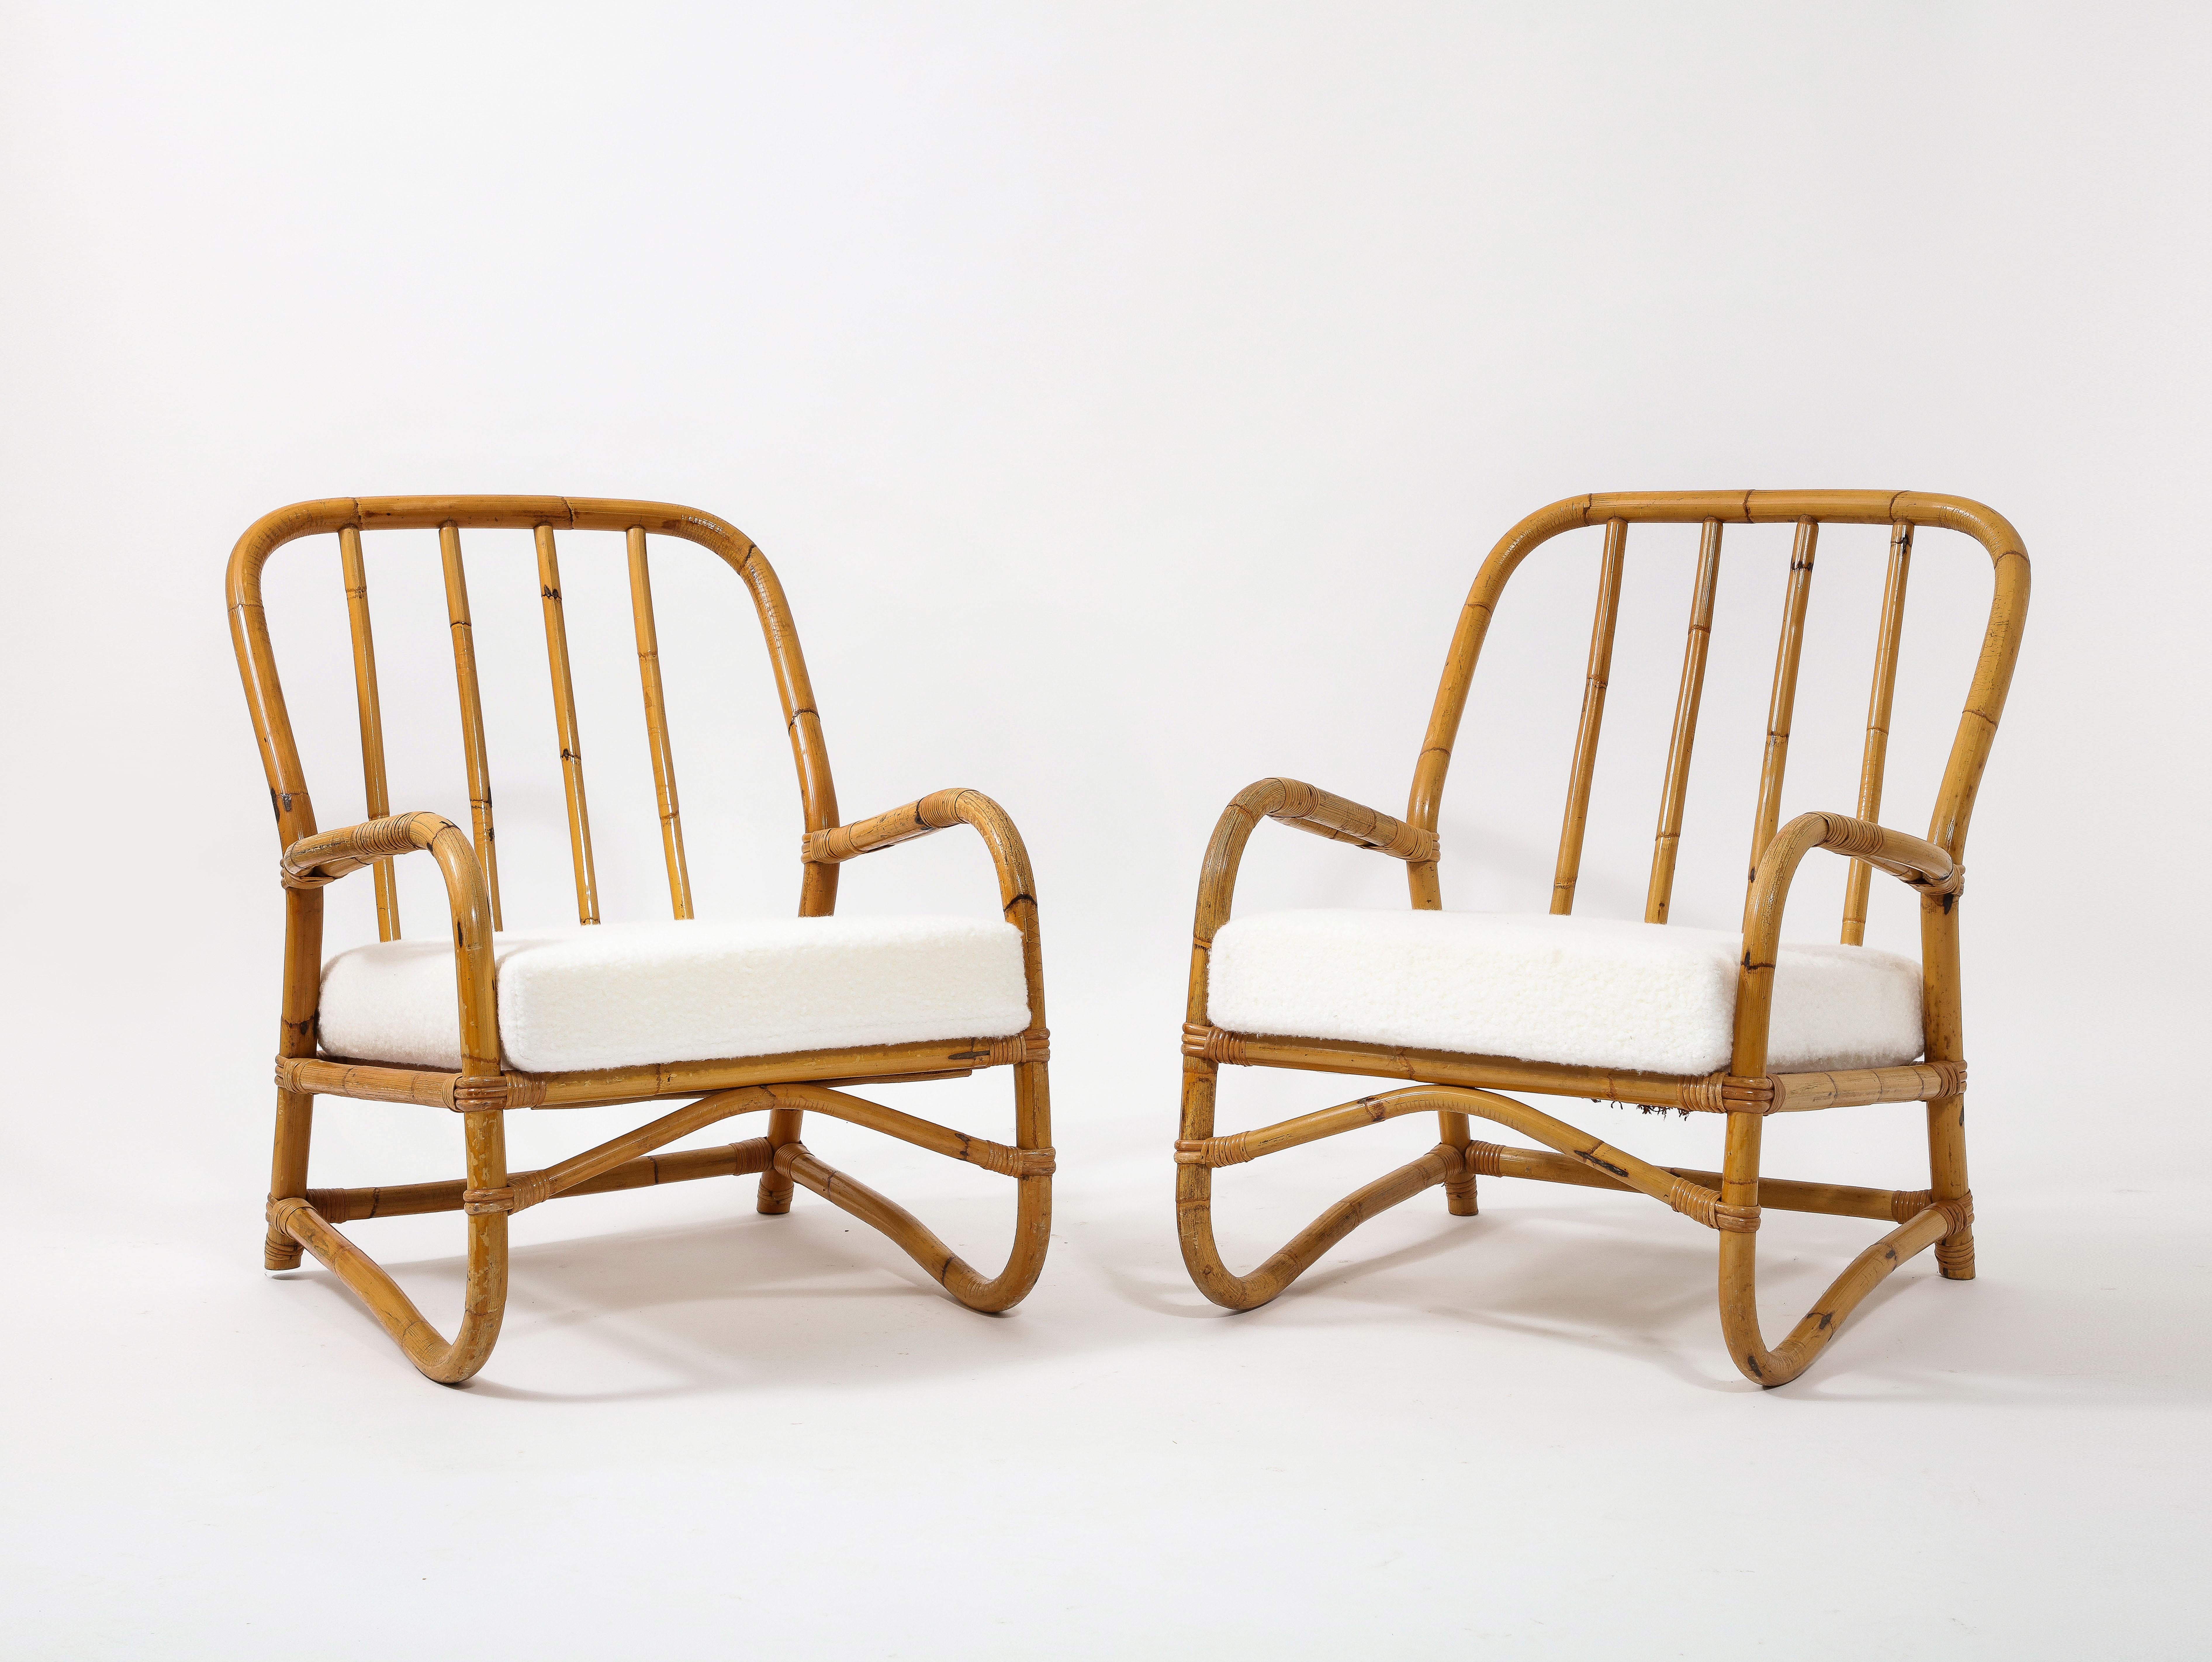 Louis Sognot Style Pair of Curved Bamboo Armchairs, France 1950's For Sale 11